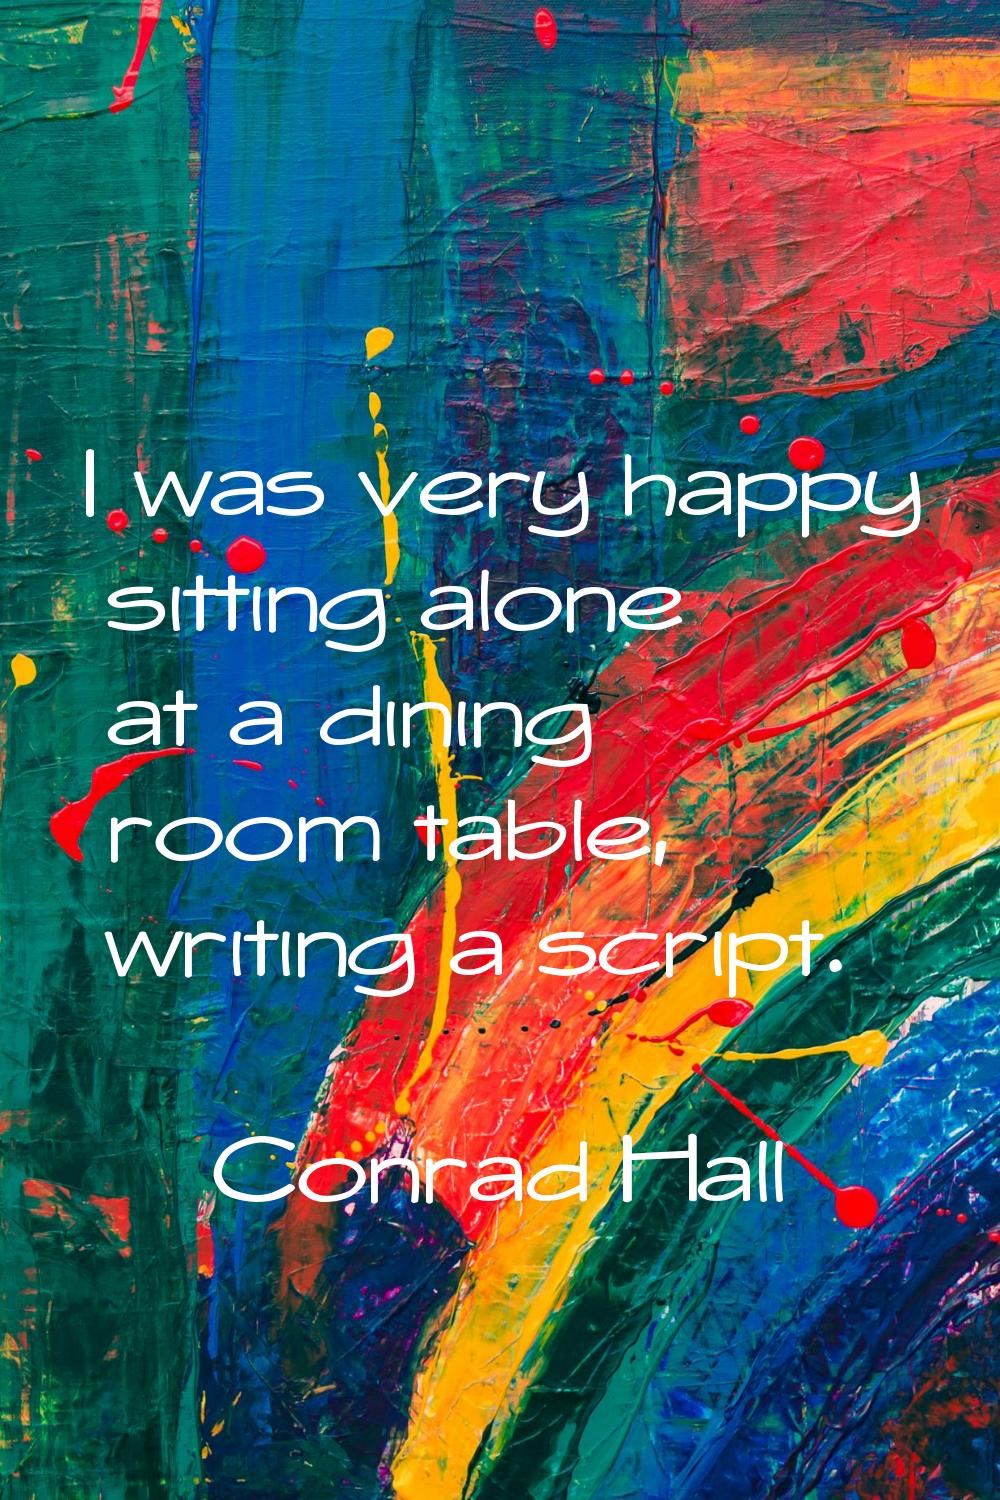 I was very happy sitting alone at a dining room table, writing a script.